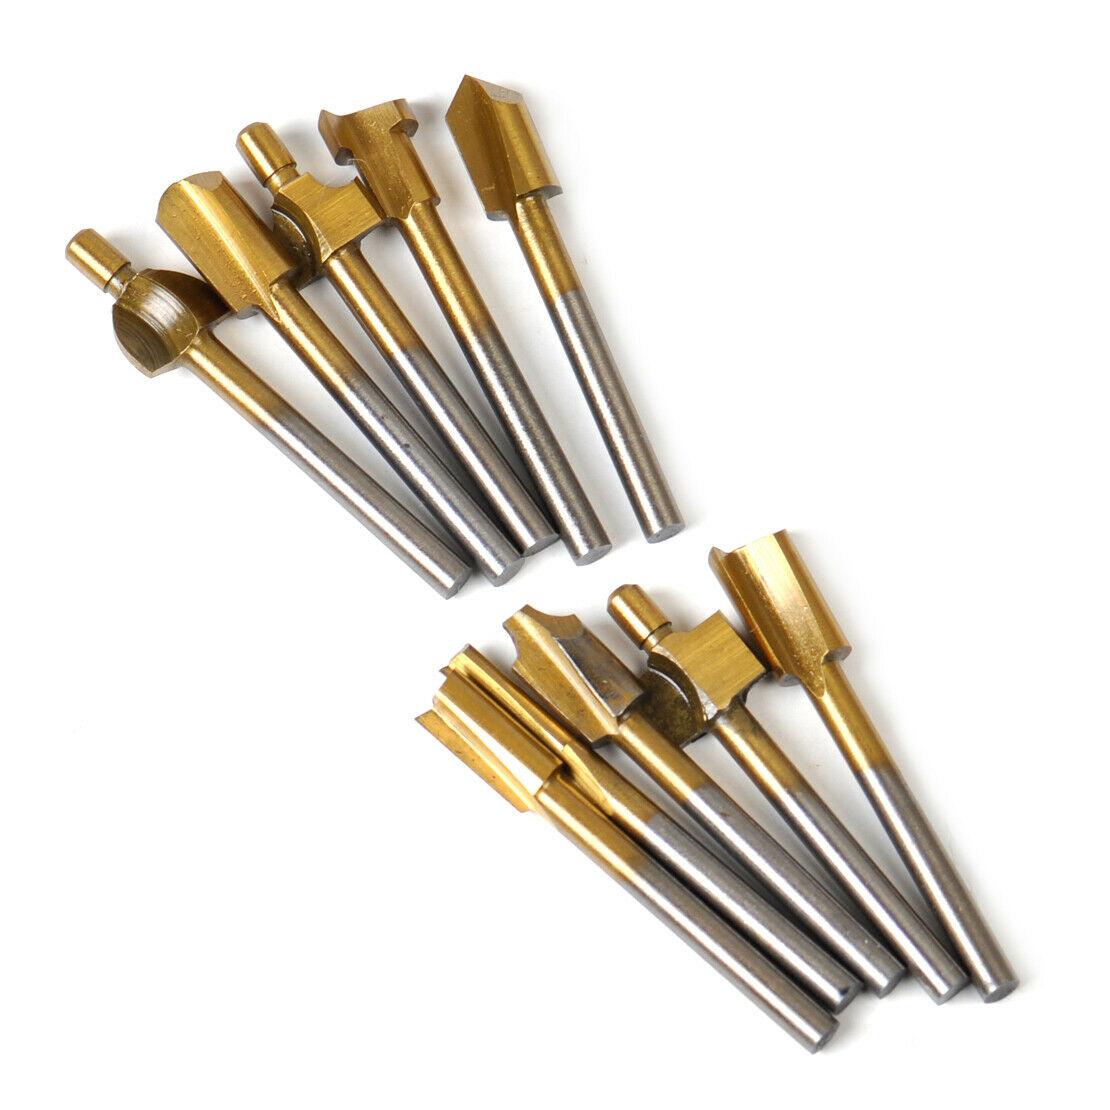 1 Set of 10pcs 1/8" Mini Shank HSS Titanium Router Bits Fit for Rotary Tool An